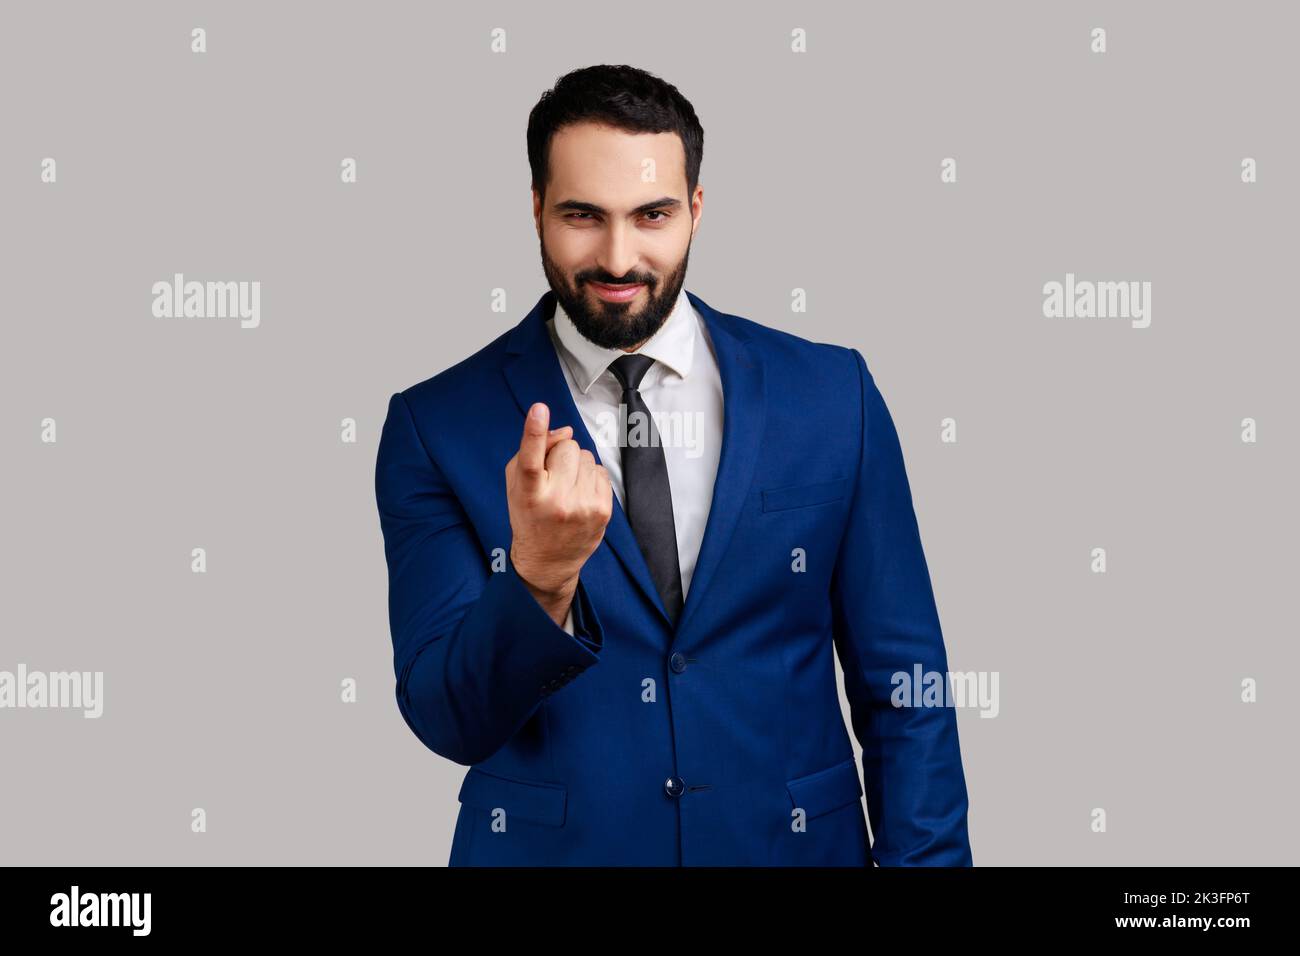 Portrait of positive smiling handsome bearded businessman calling with finger gesture, inviting to come in, wearing official style suit. Indoor studio shot isolated on gray background. Stock Photo